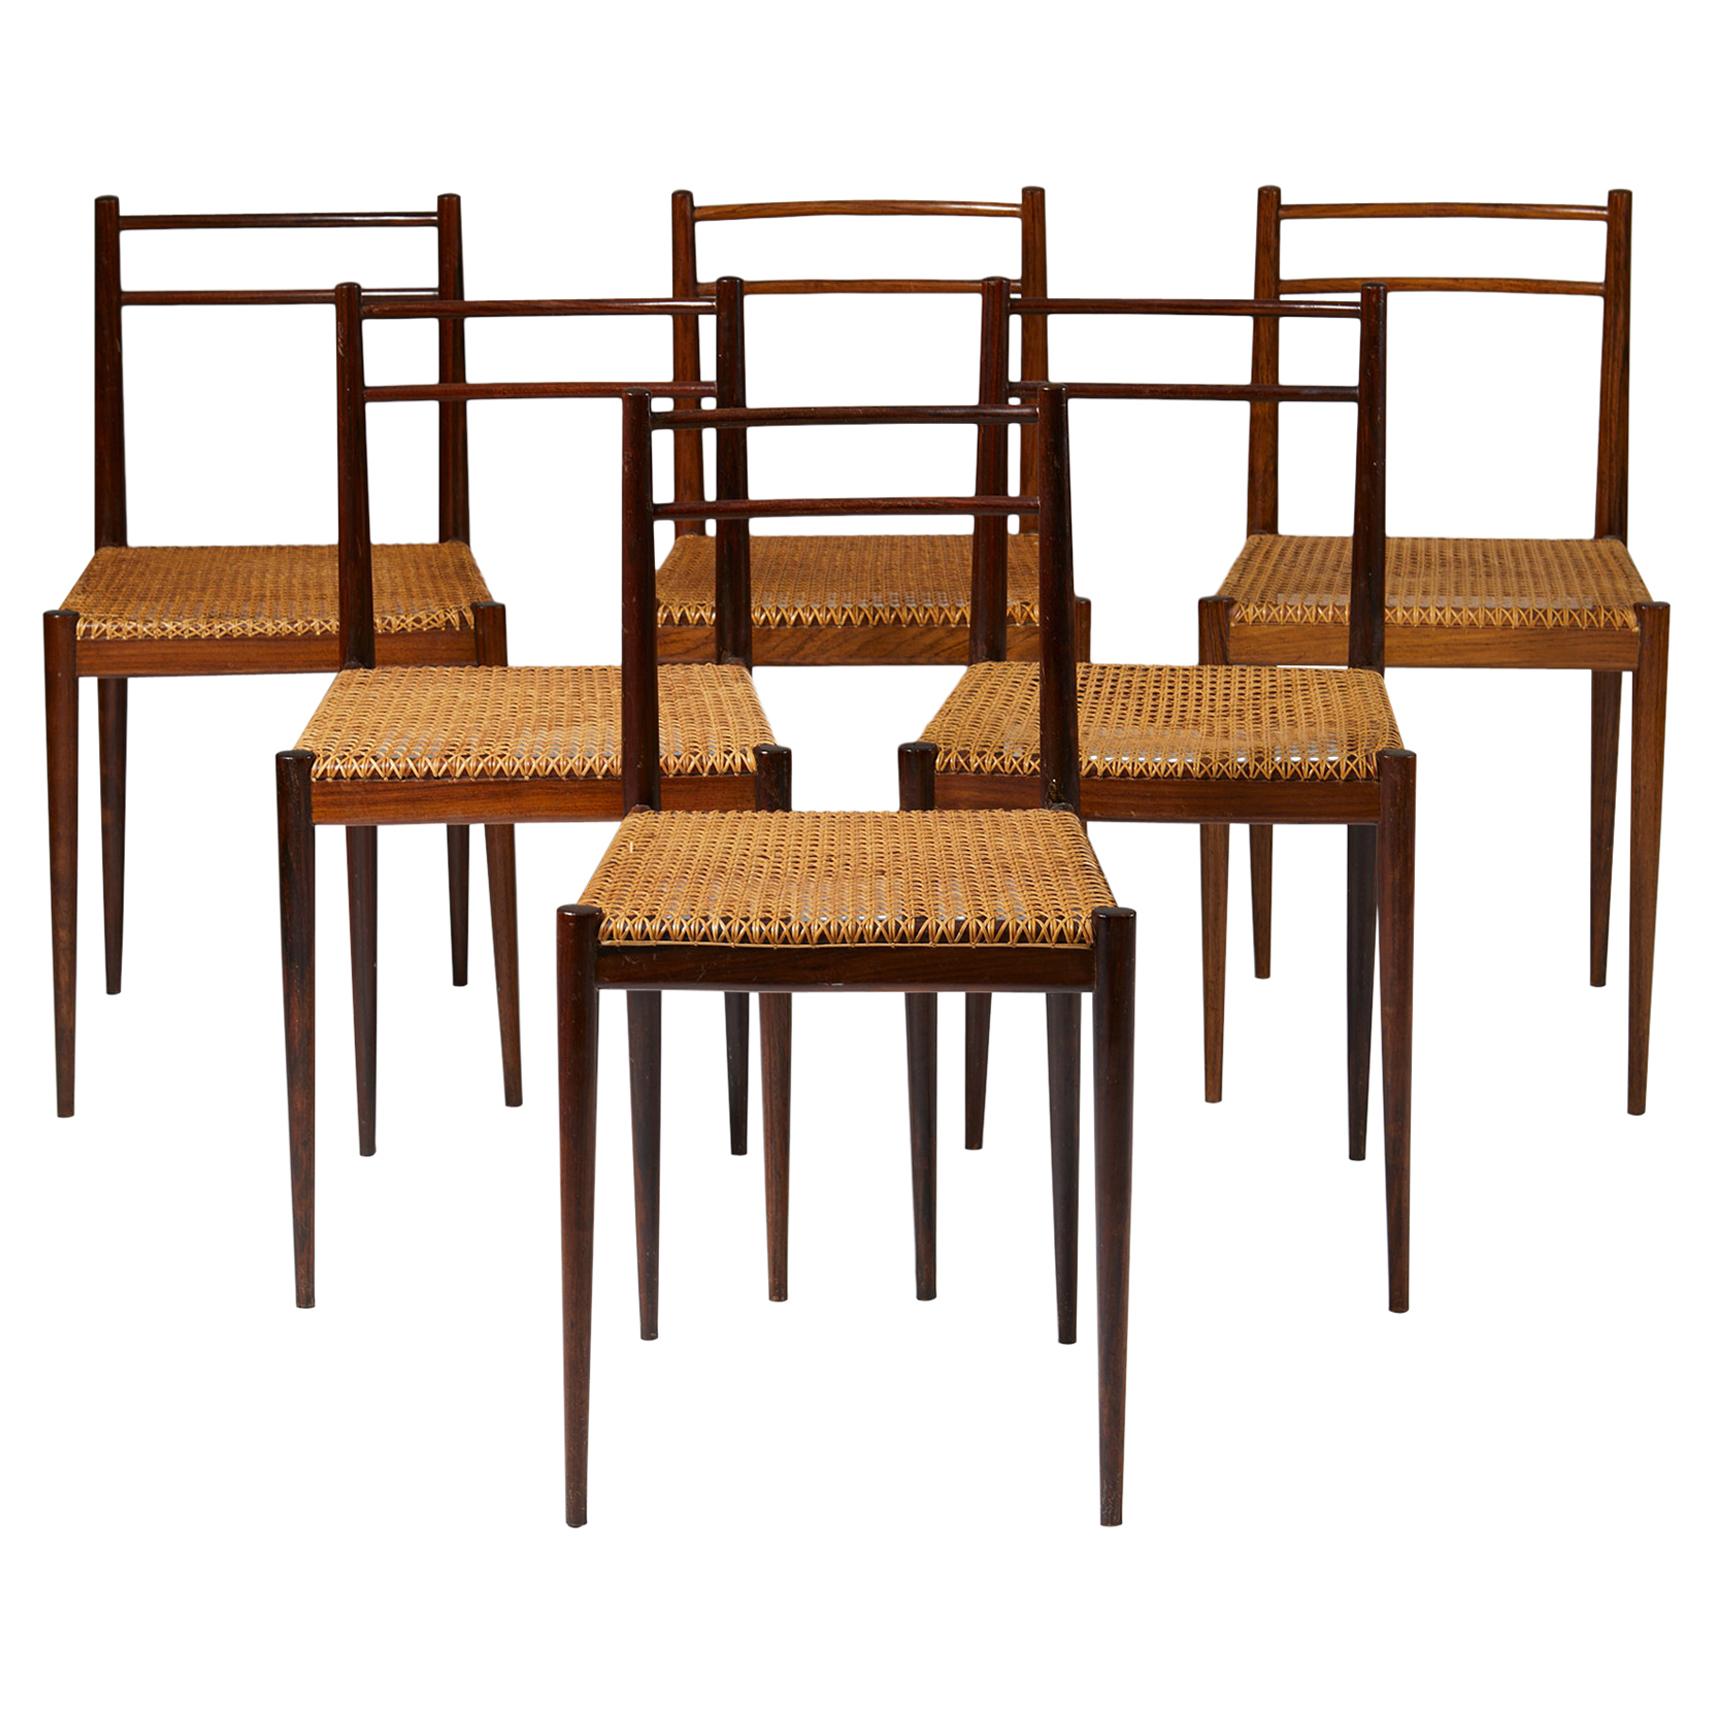 Set of Six Dining Chairs Designed by Jörgen Clausen, Denmark, 1950’s